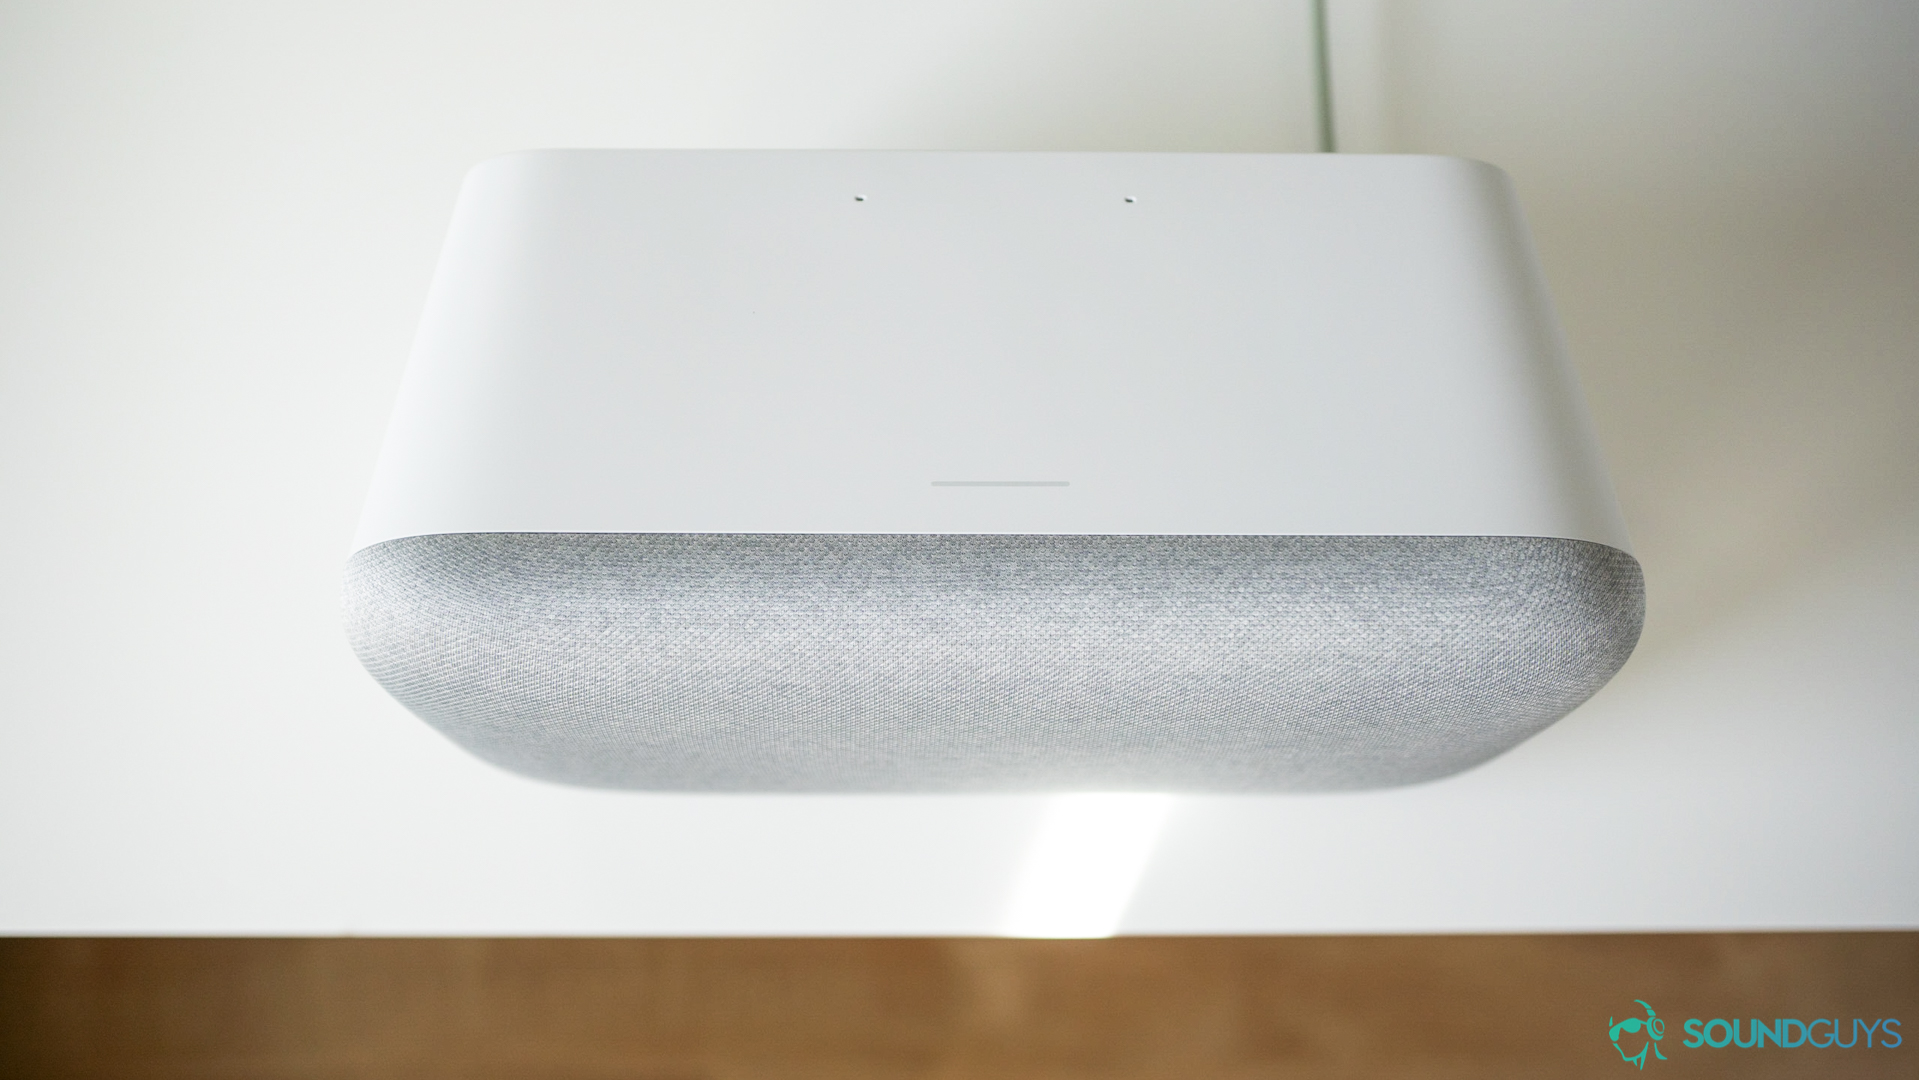 The touch sensitive part of the Google Home Max is a gray strip.